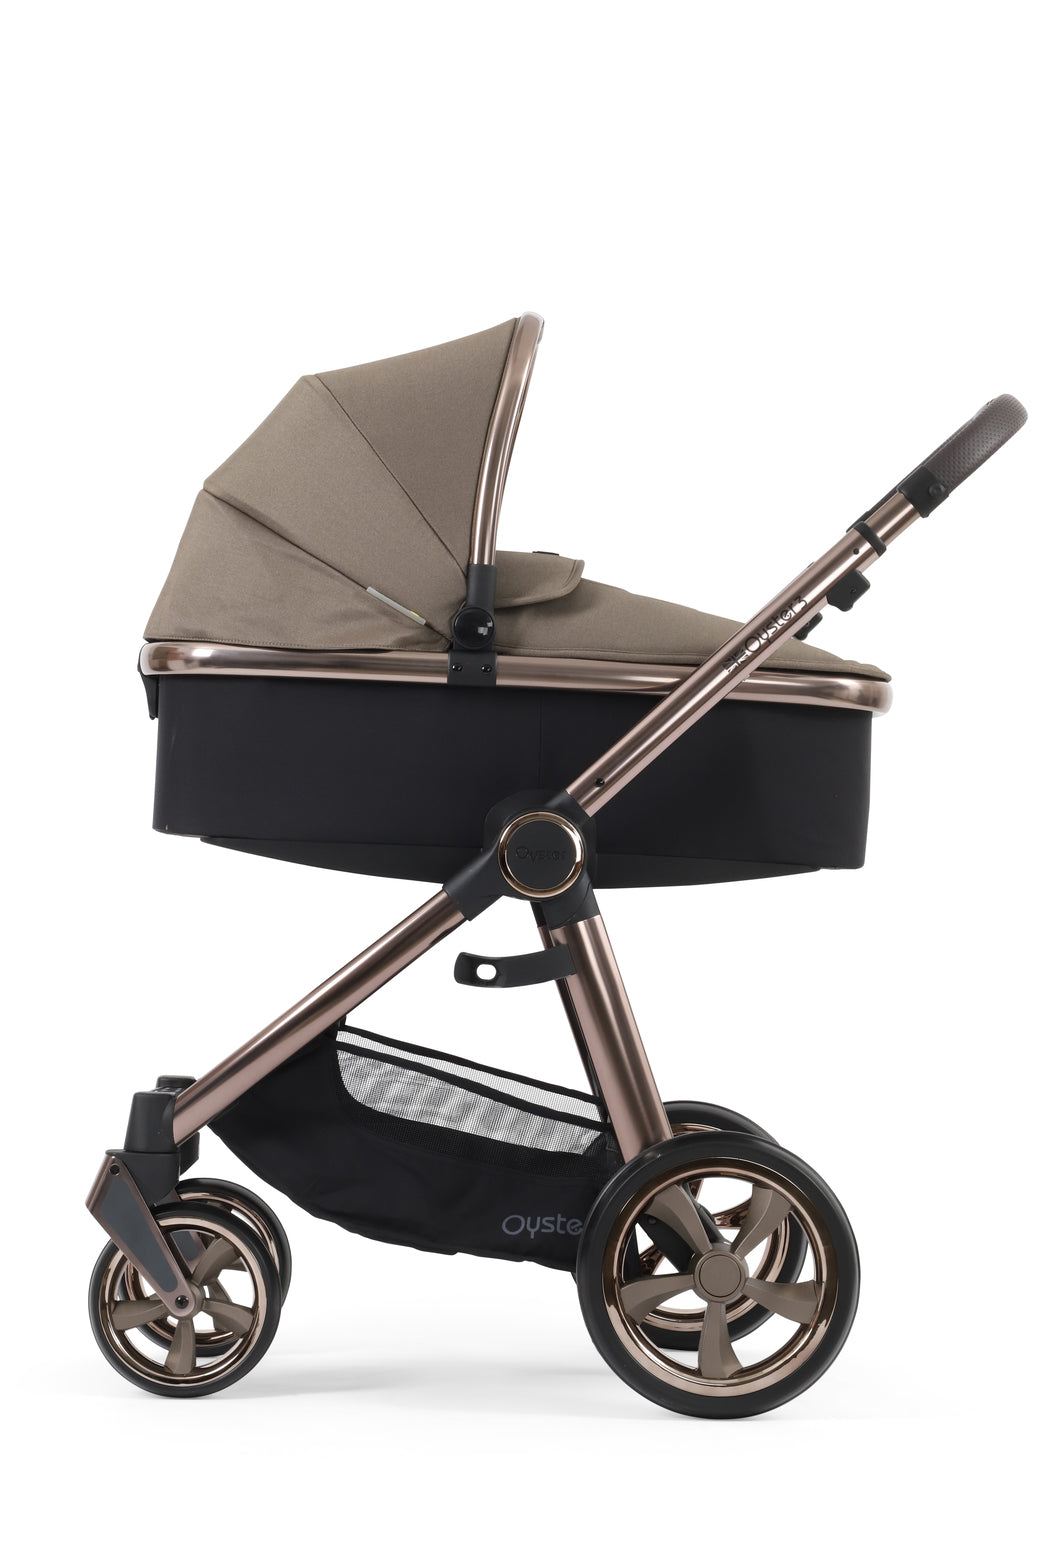 BabyStyle Oyster 3 Carrycot - Mink -  | For Your Little One